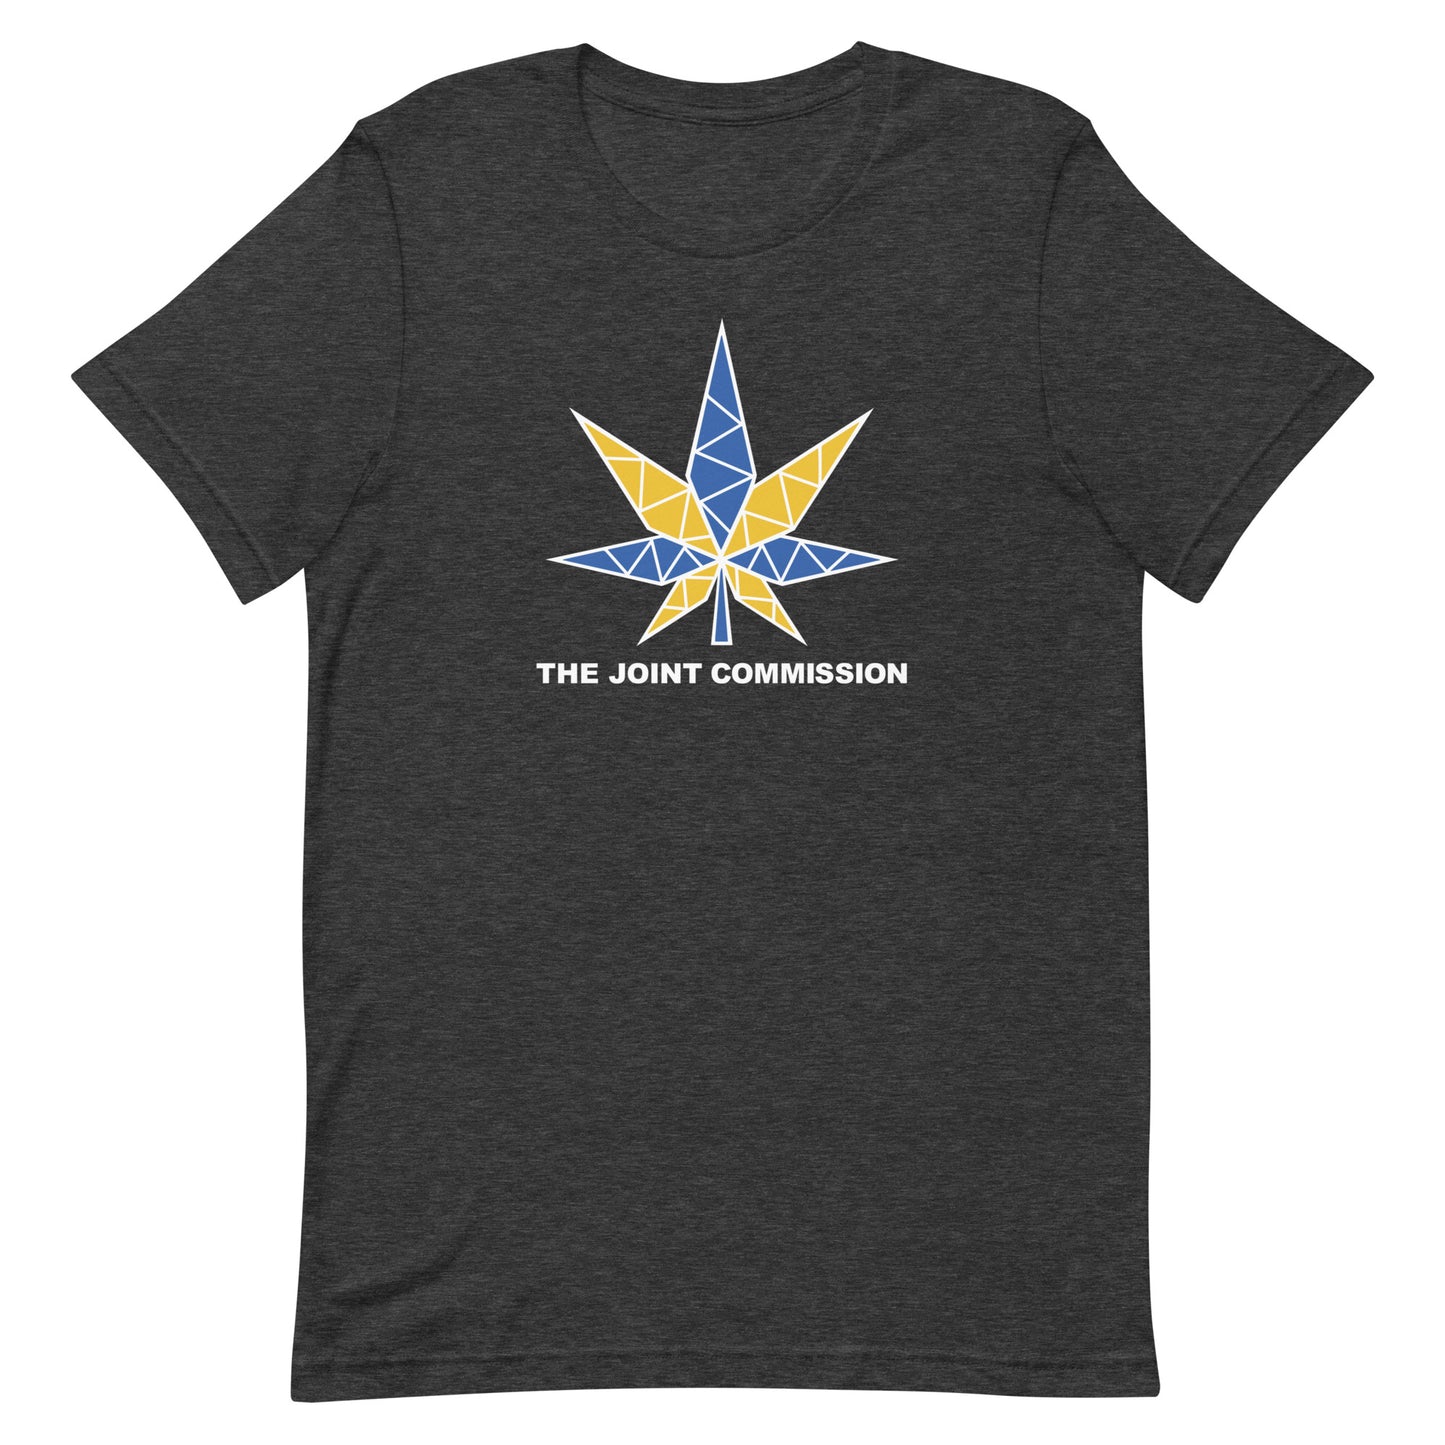 The Joint Commission Tee